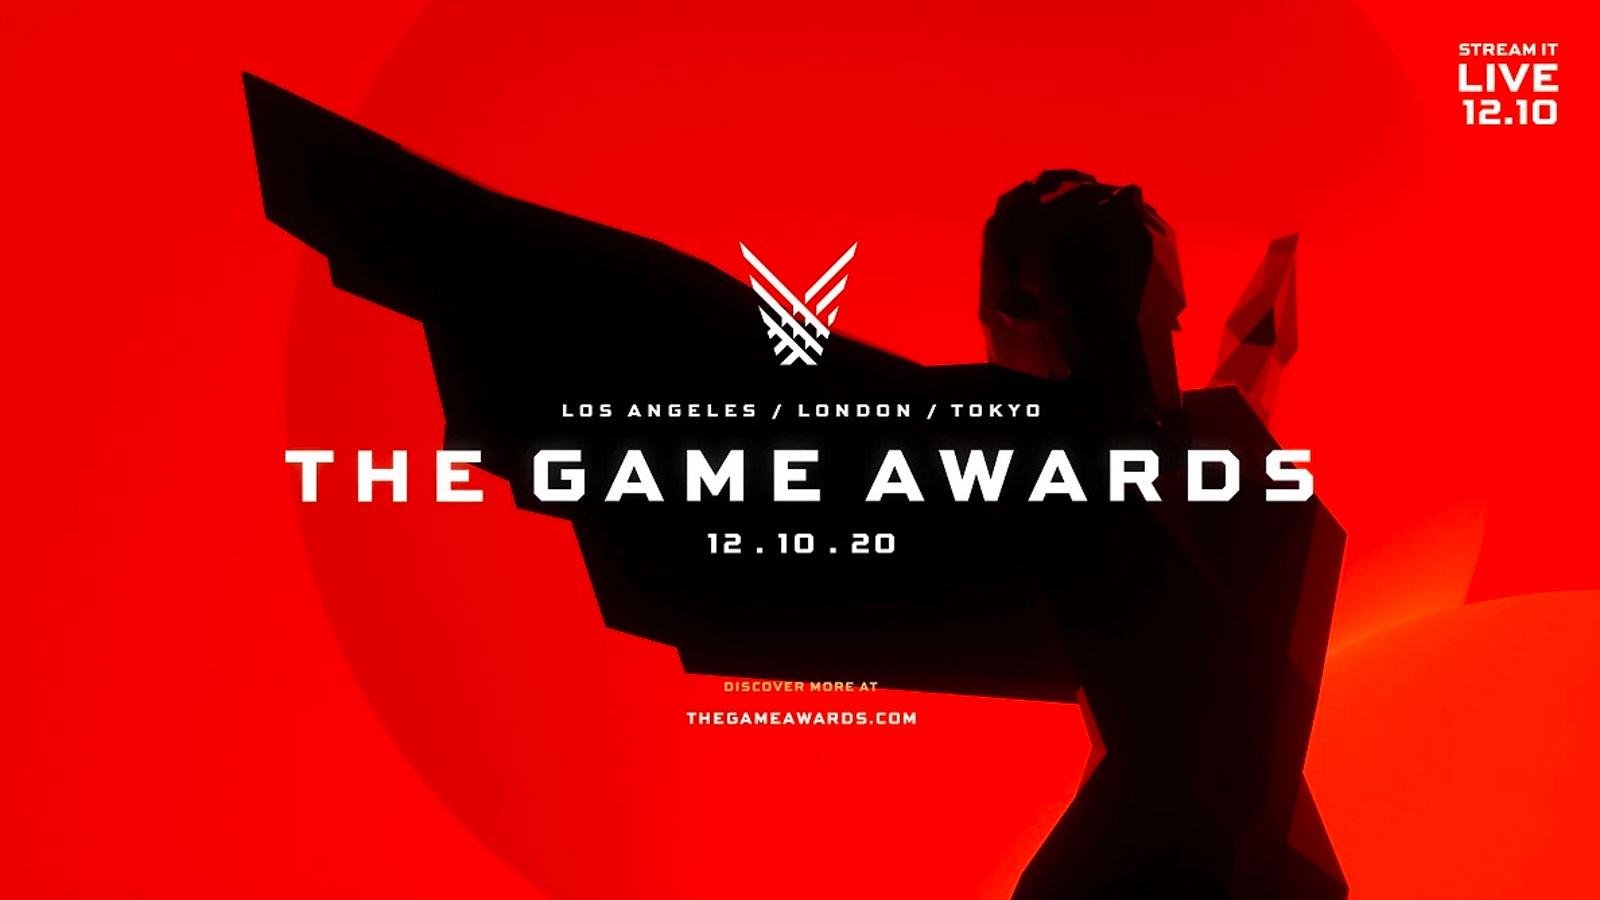 Game Awards 2020 nominees: best esports player, Game of the Year, more -  Dexerto